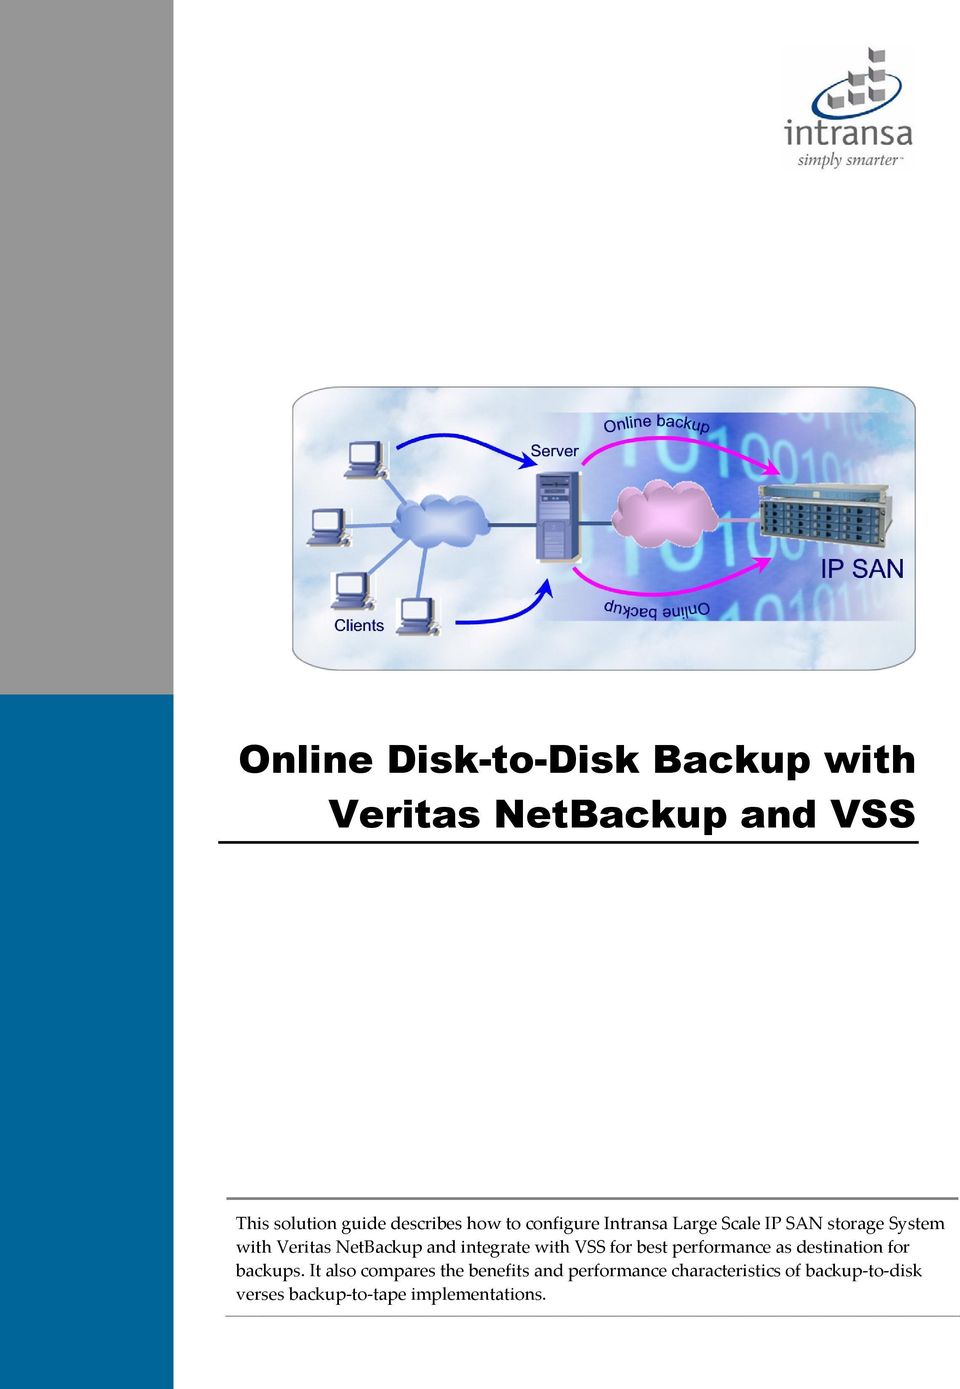 integrate with VSS for best performance as destination for backups.